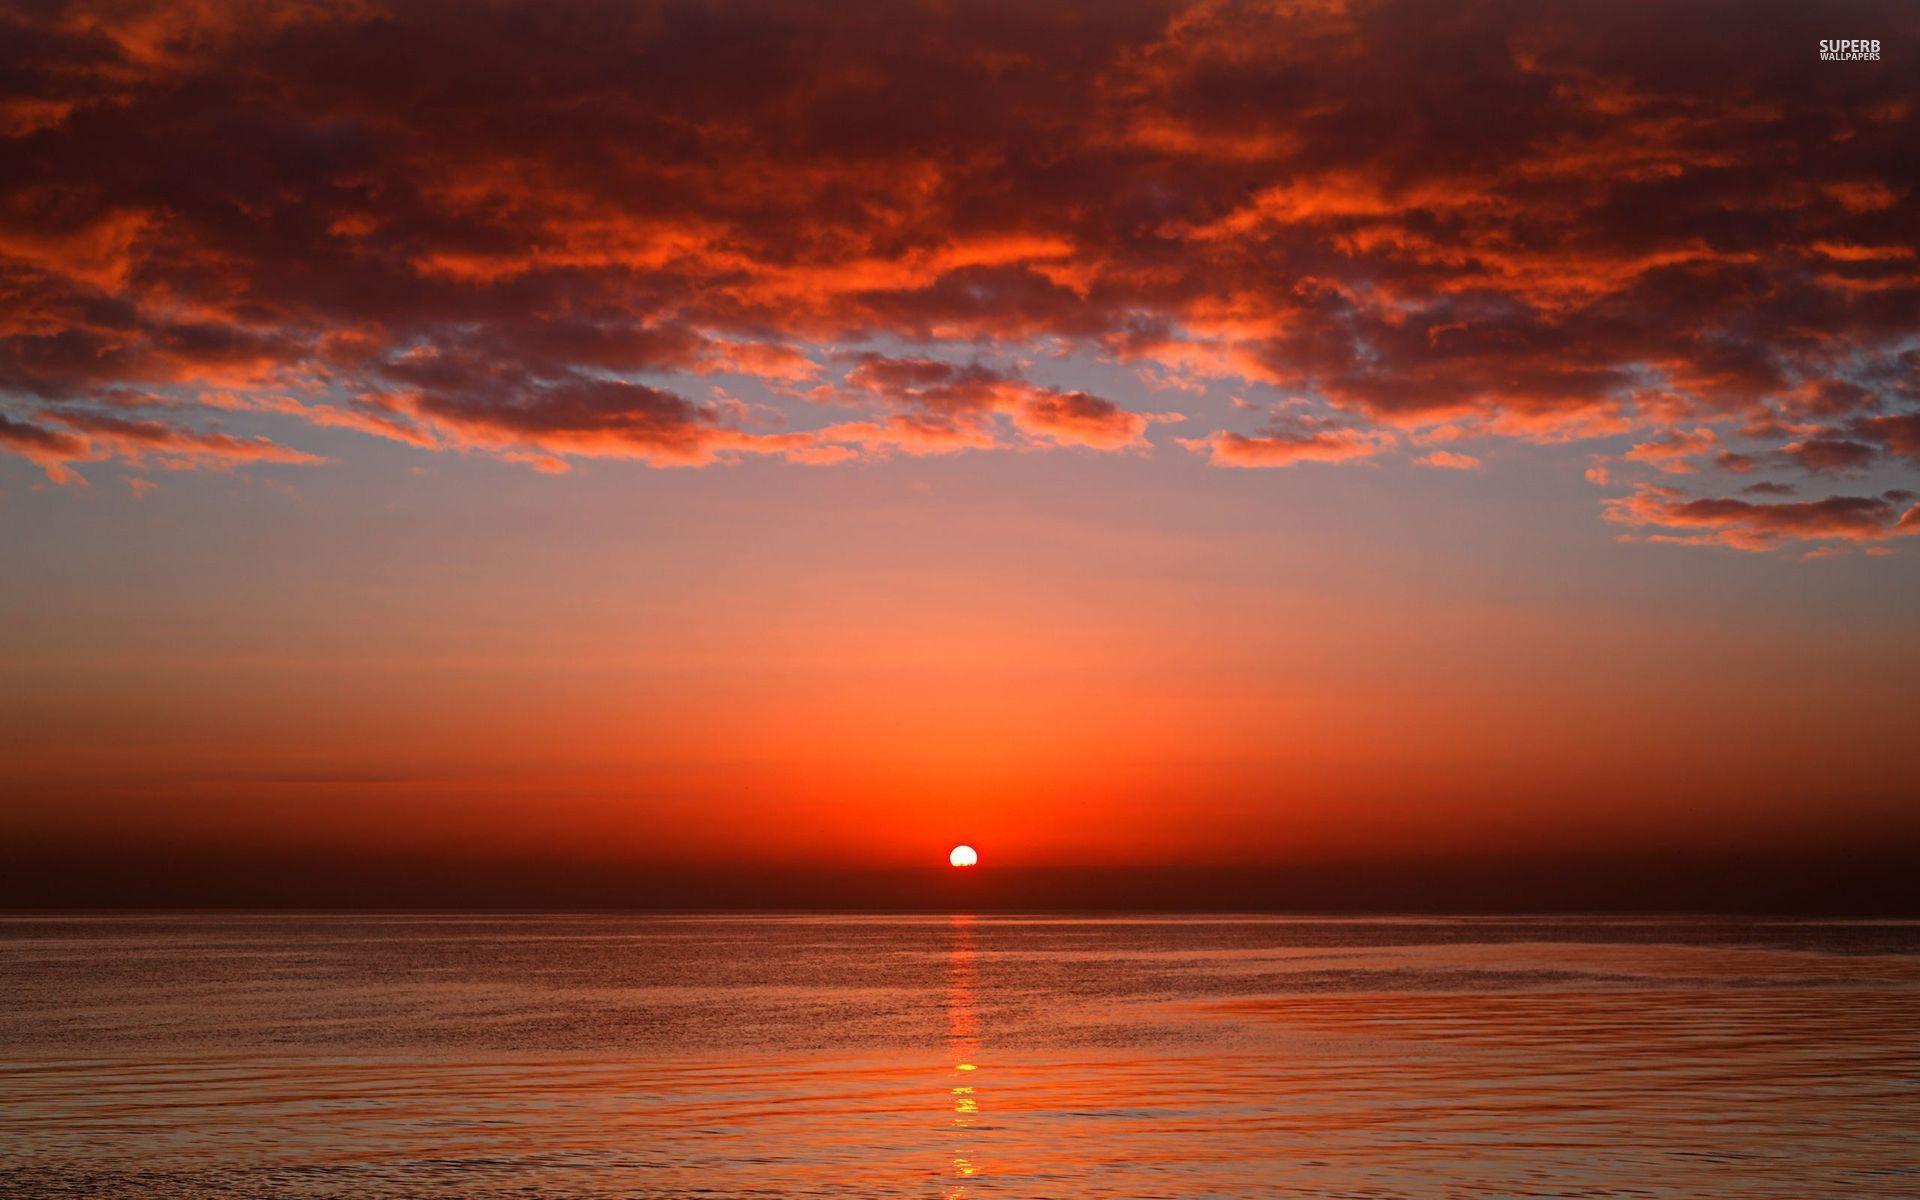 Red Sunset Ocean & Red Clouds wallpaper. Red Sunset Ocean & Red